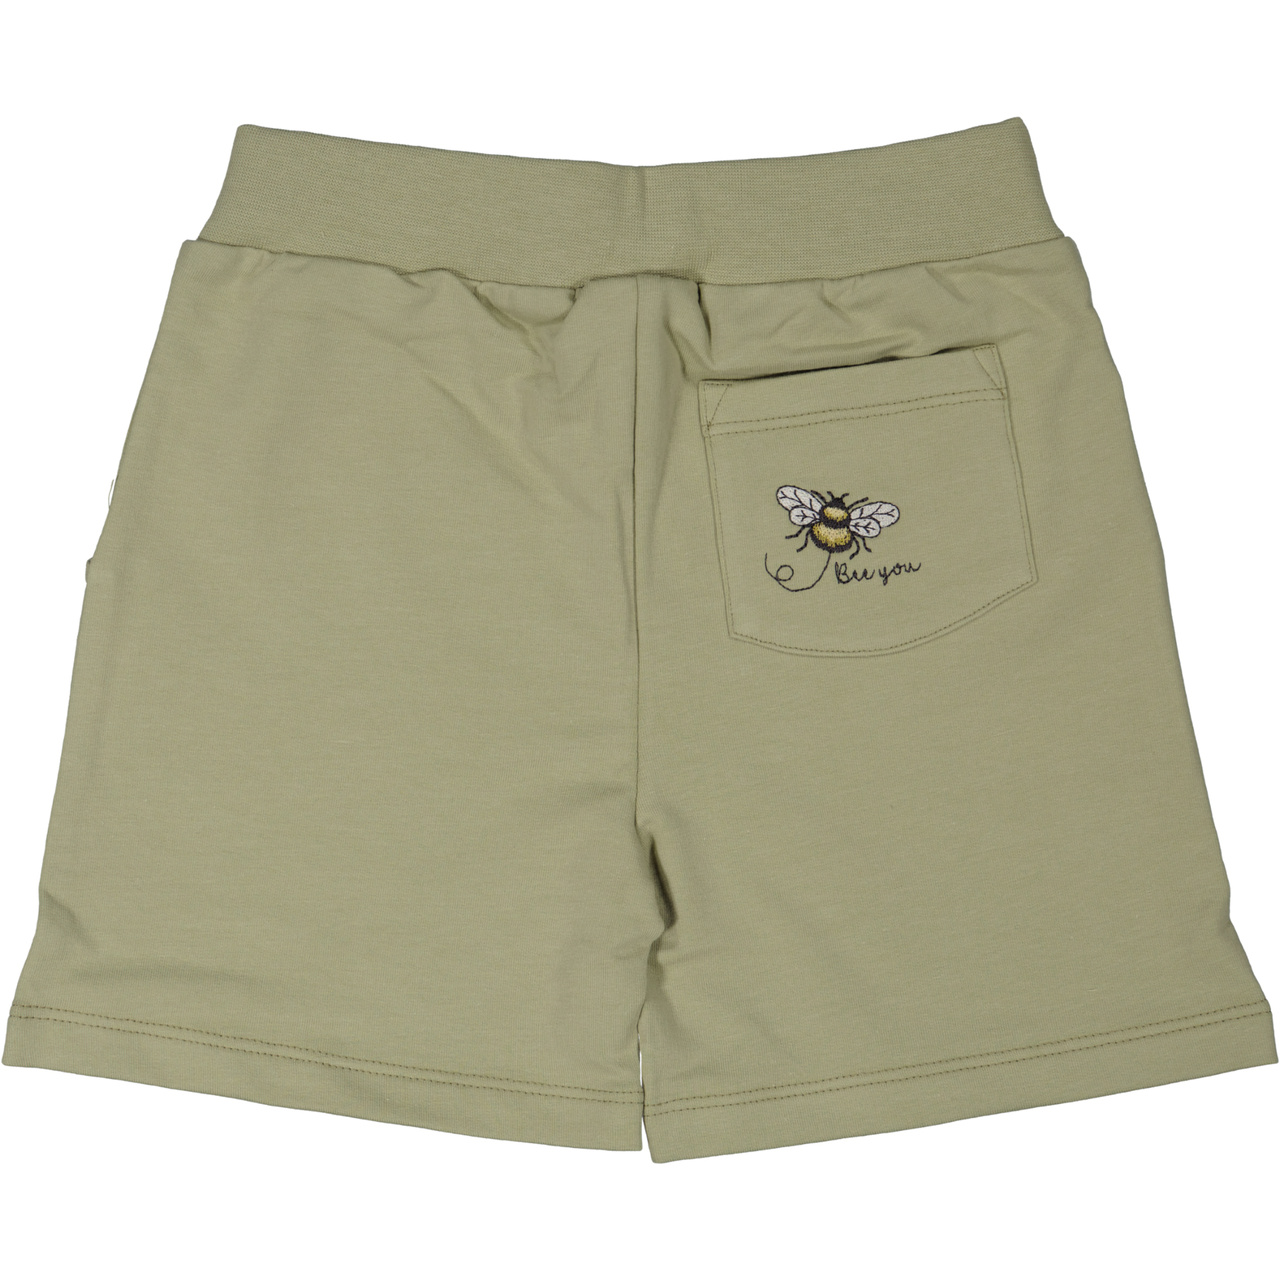 College shorts Olive 86/92